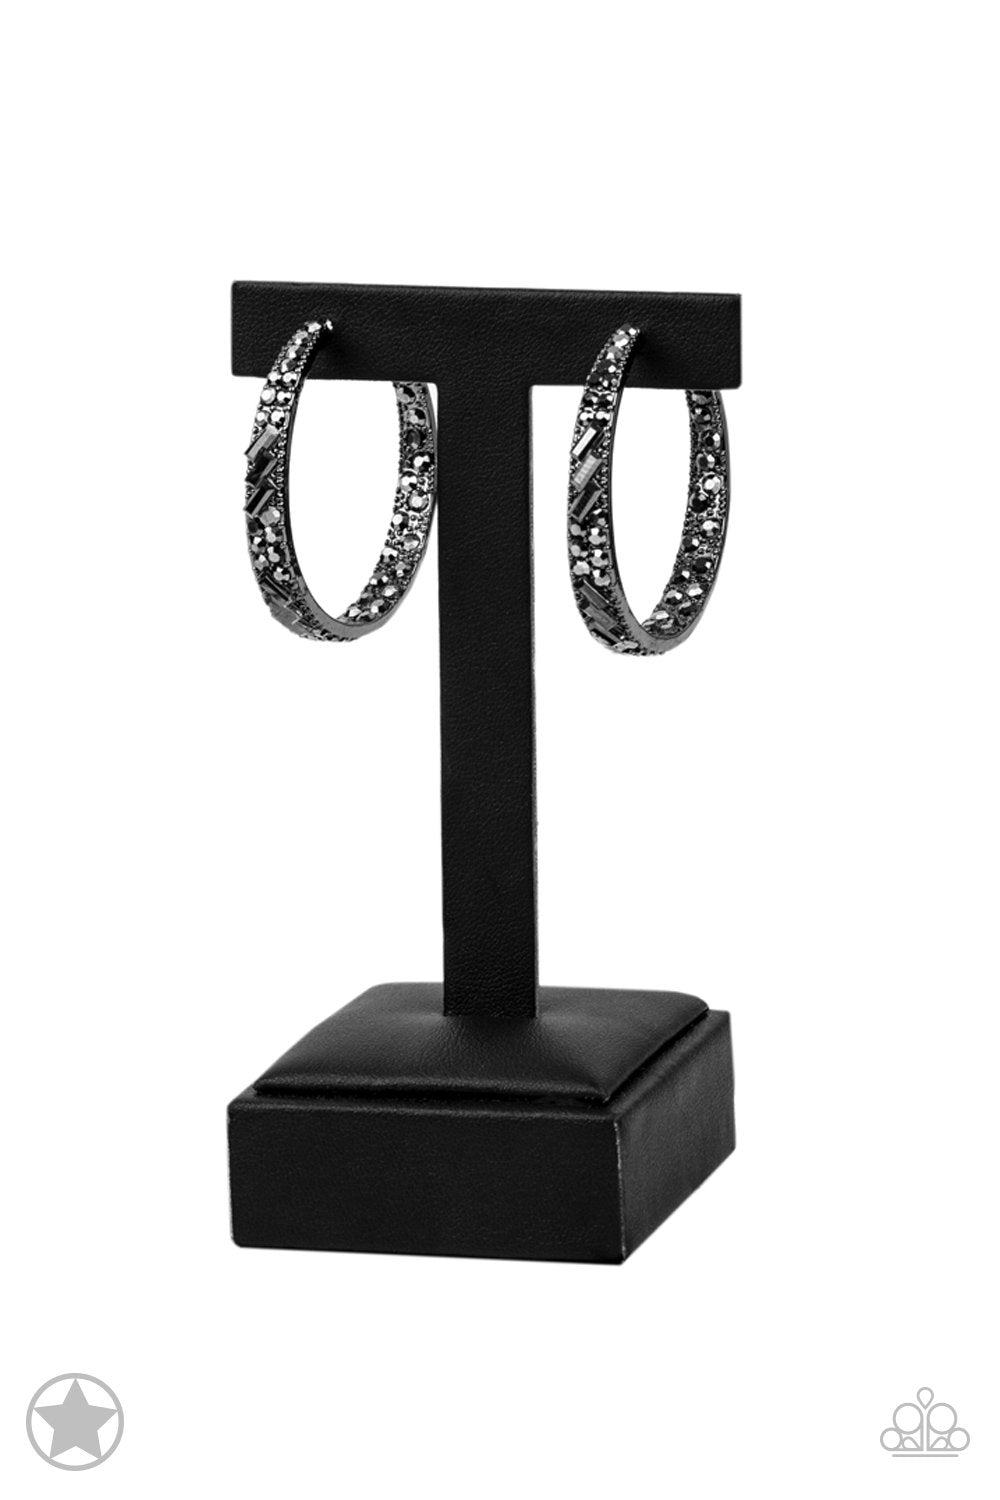 Glitzy By Association Gunmetal Black and Hematite Hoop Earrings - Paparazzi Accessories- on bust -CarasShop.com - $5 Jewelry by Cara Jewels